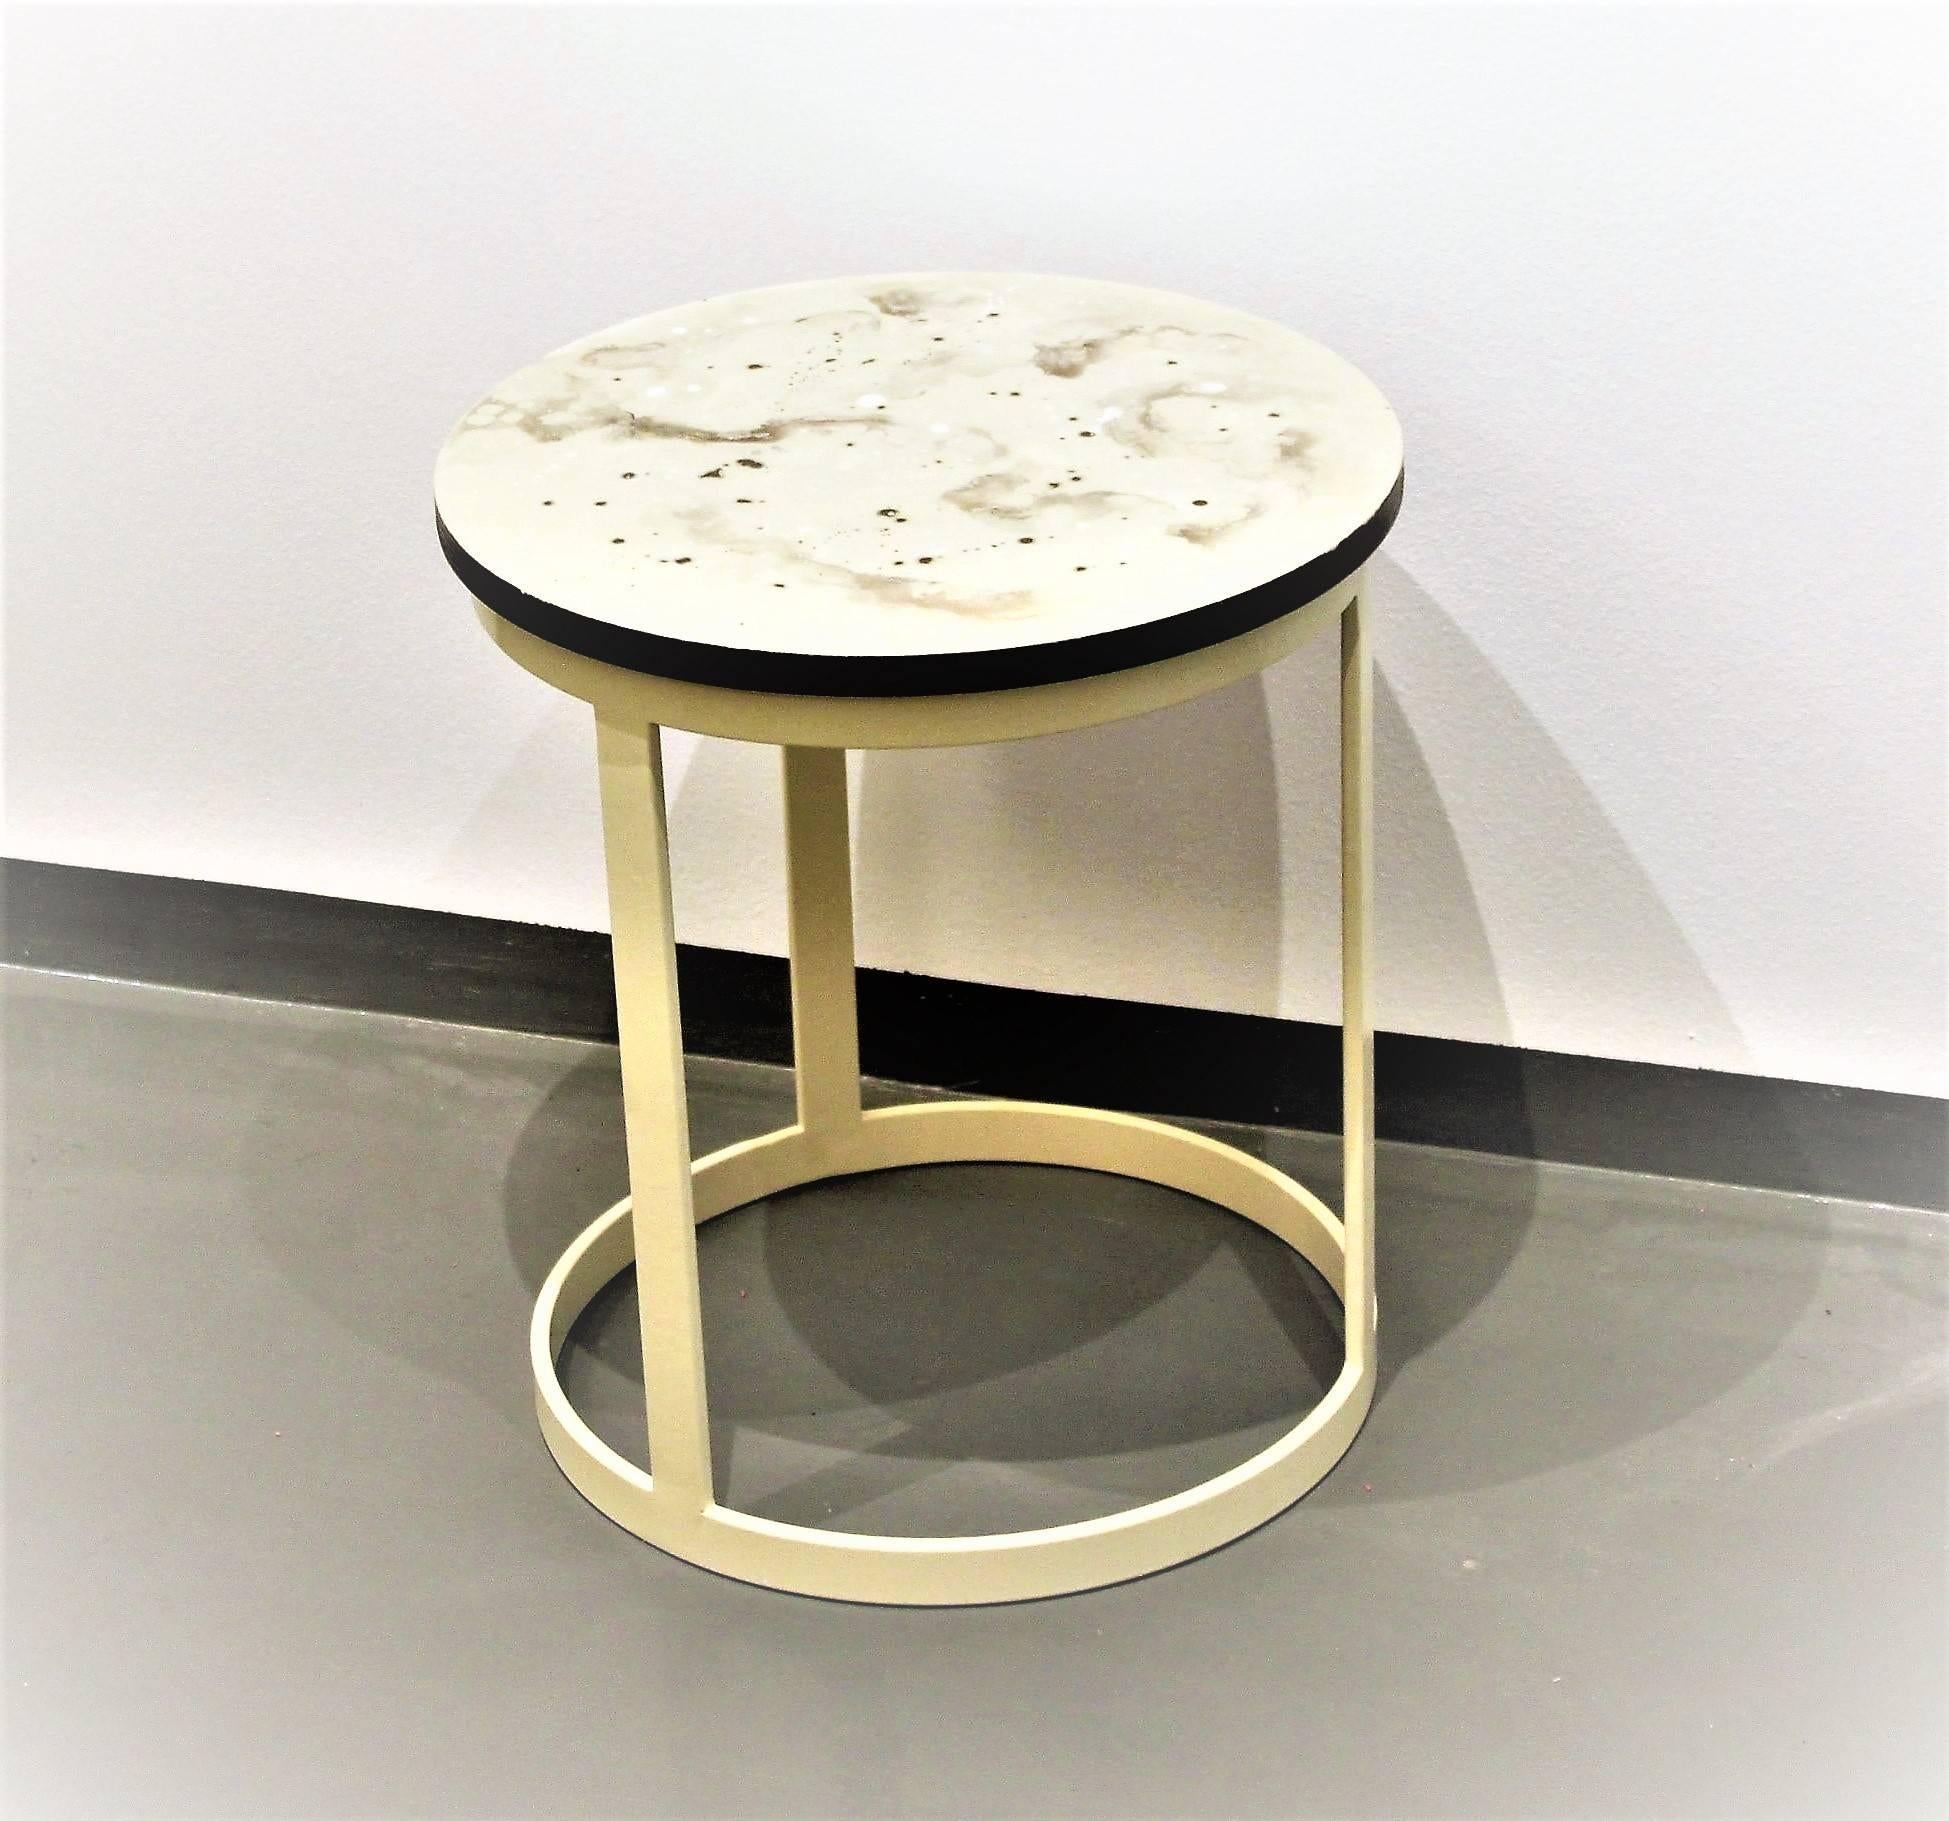 This set of side tables is part of Viscosity Art & Resin Gallery art furniture collection.
The gamma of colored resin coffee and natural shades on wood create a comfortable and peaceful atmosphere in any space that are chosen to decorate. The